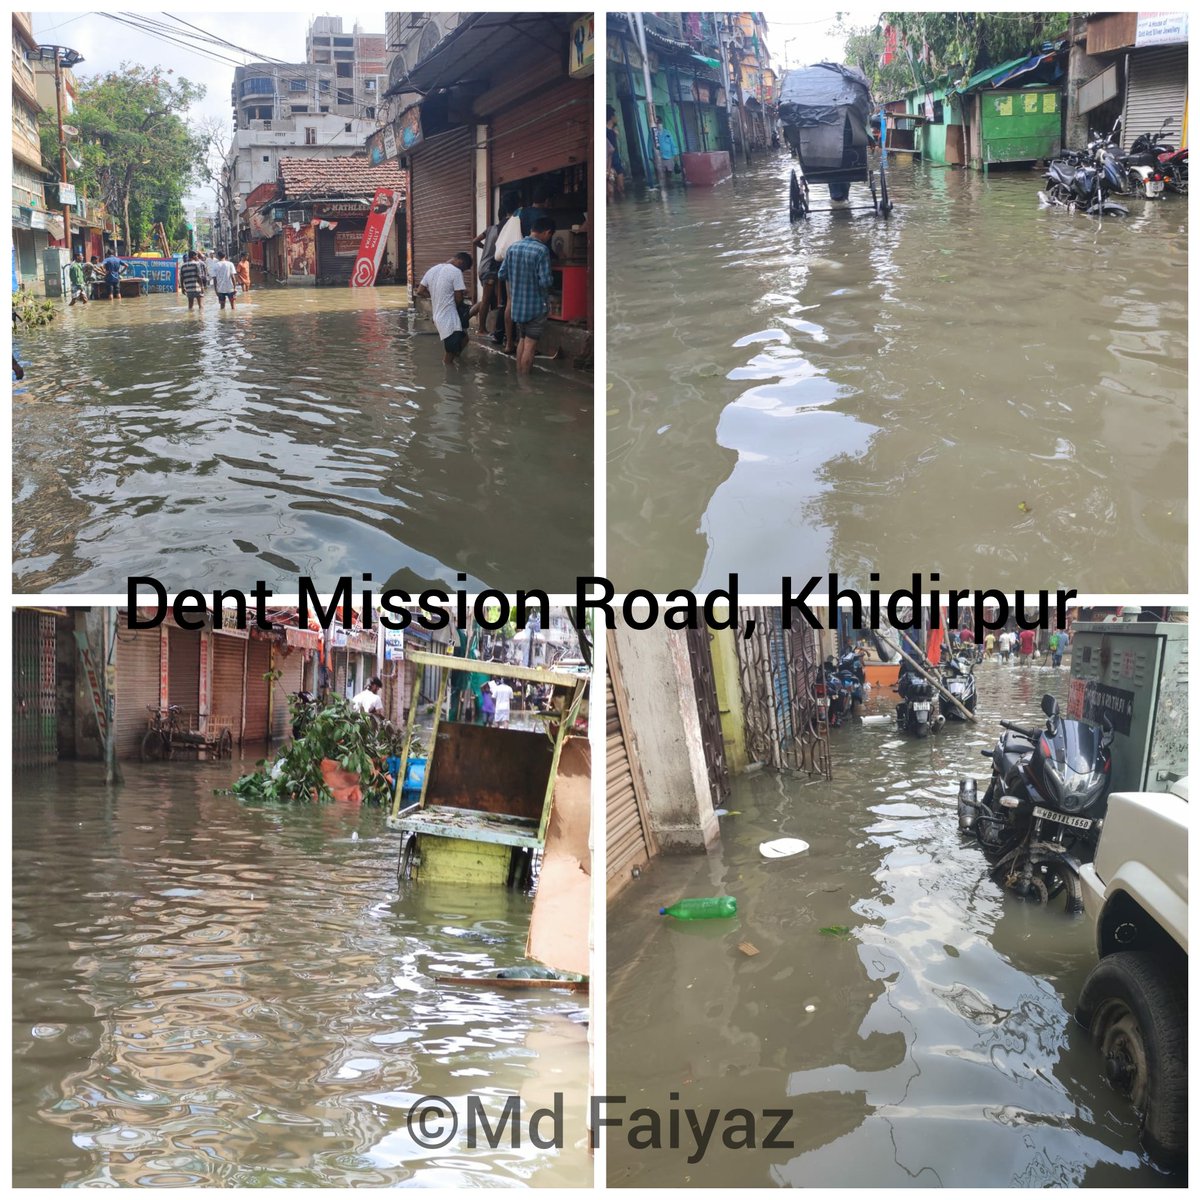 5. Dent Mission Road, photos taken by my Brother  @faiyazmd007